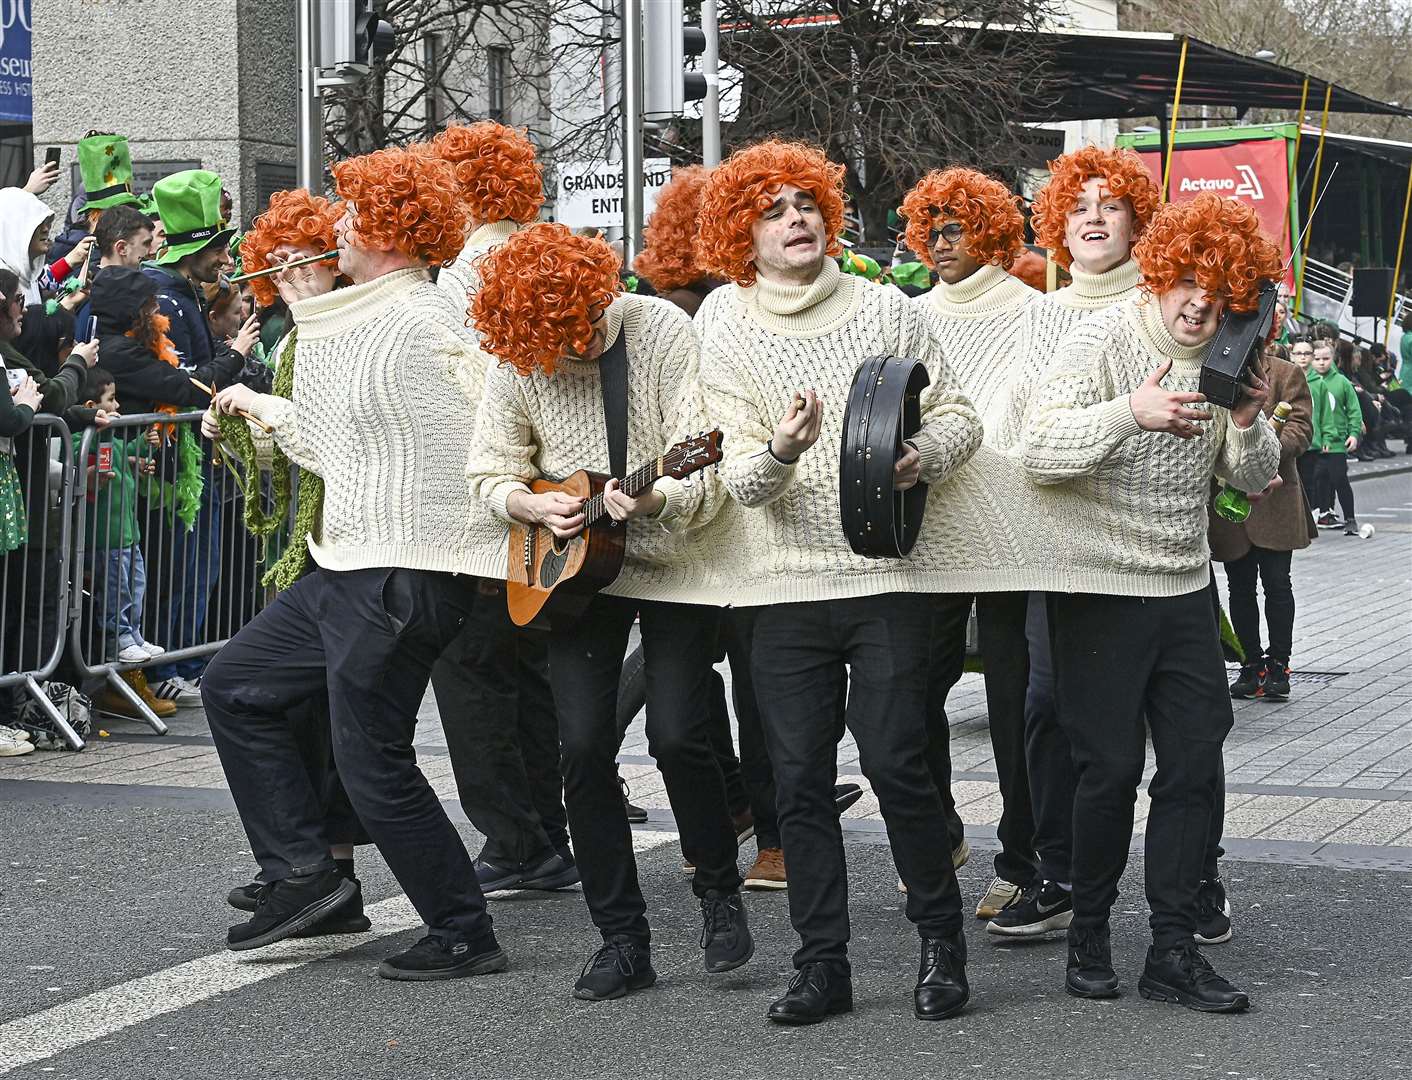 One group took an imaginative look at what it meant to be ‘110% Irish’ and wore red wigs and the same Aran jumper (Michael Chester/PA)